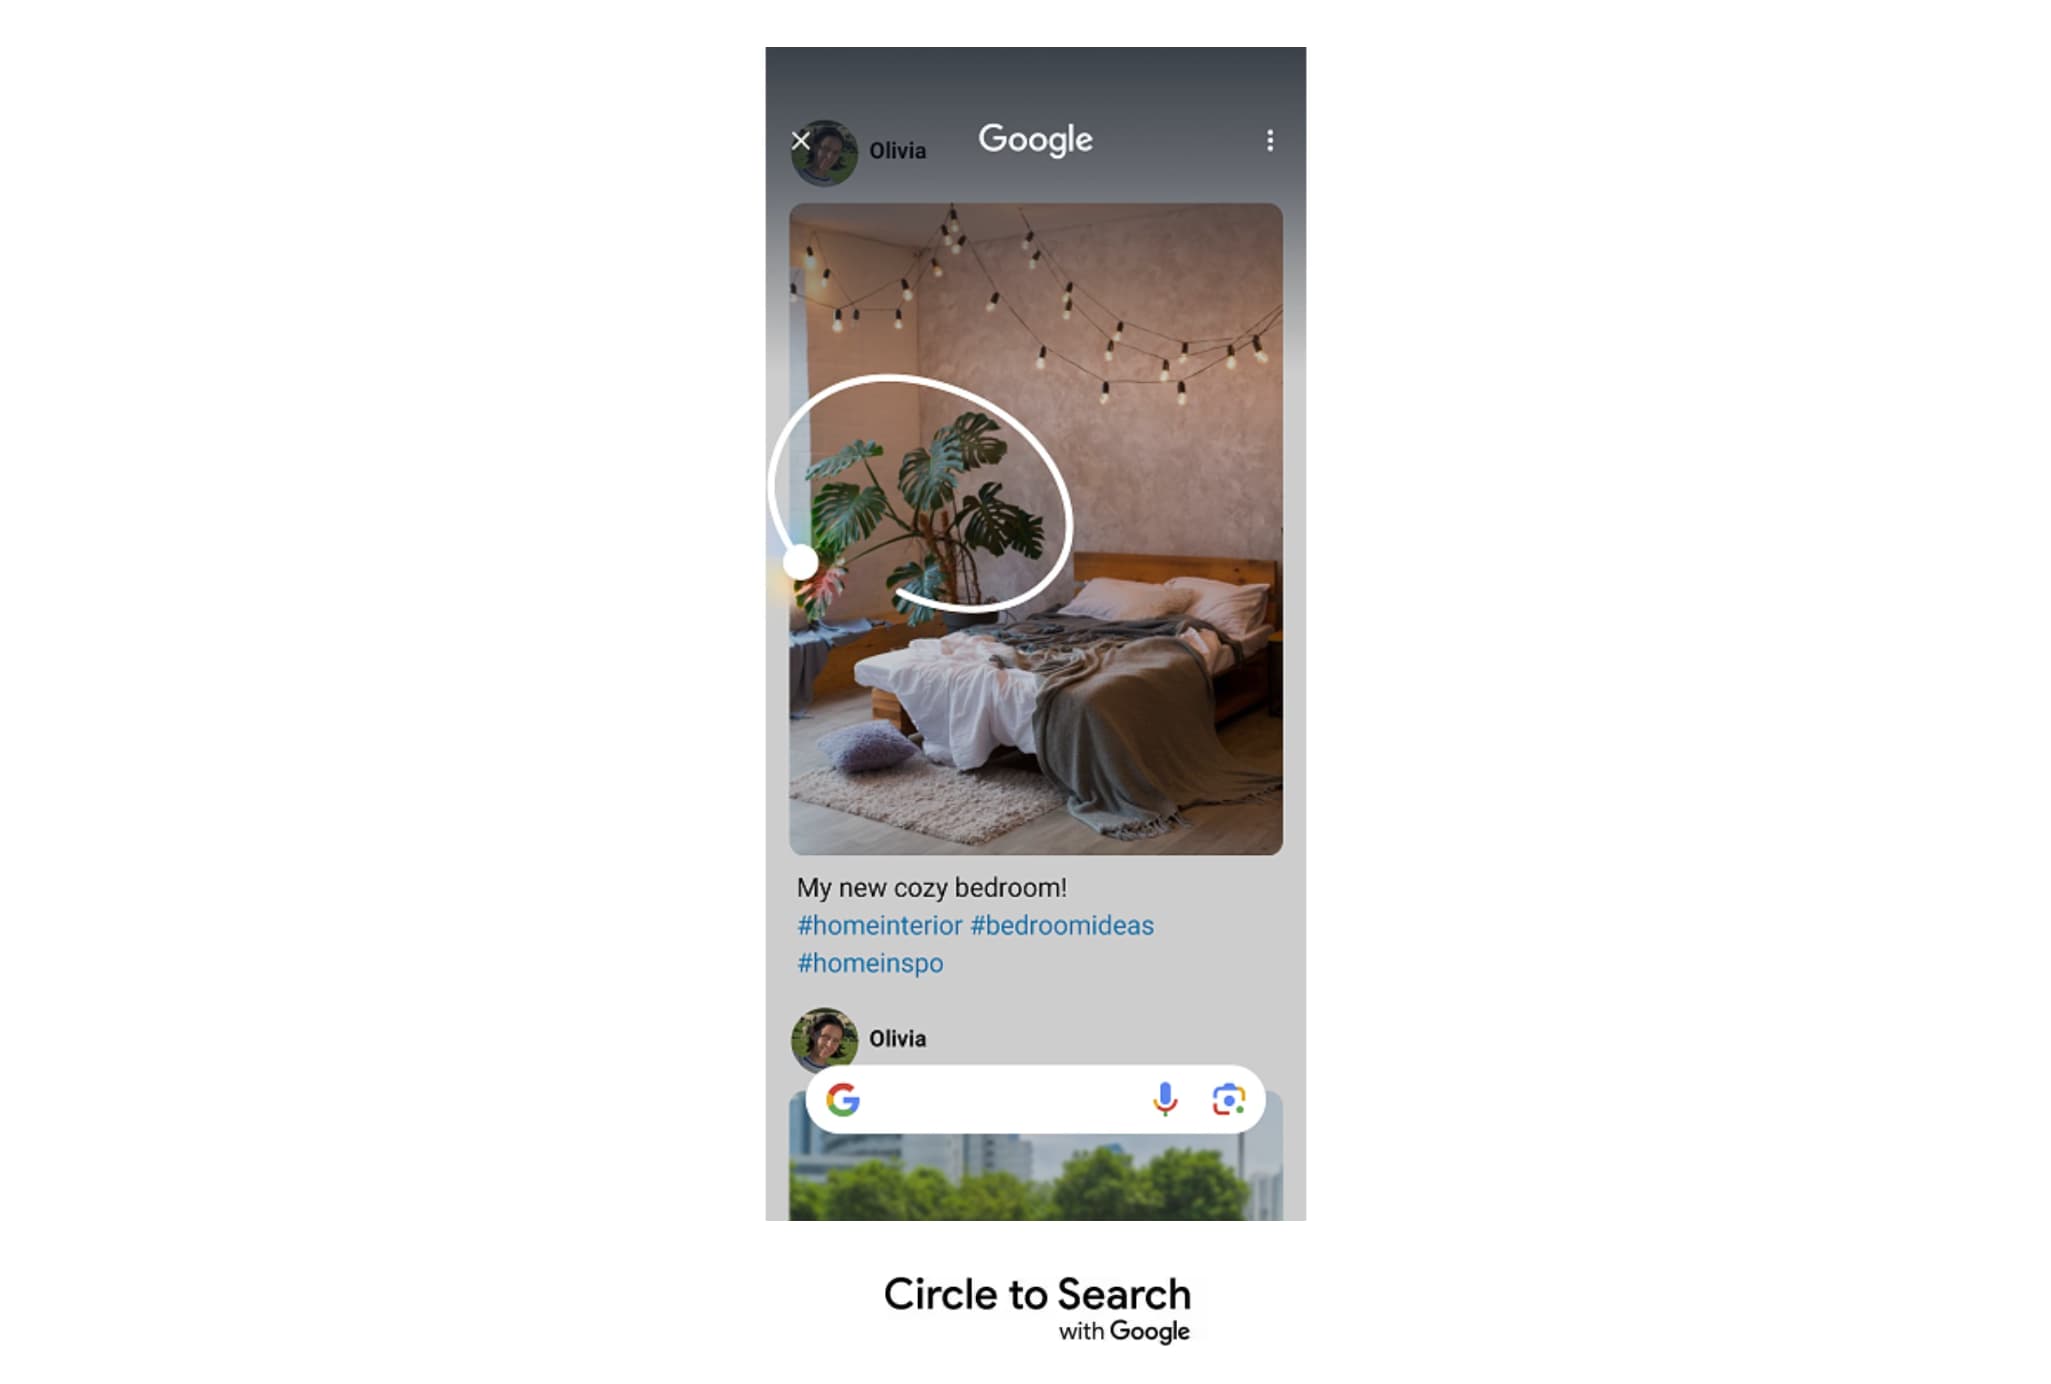 Circle to Search available to all Android